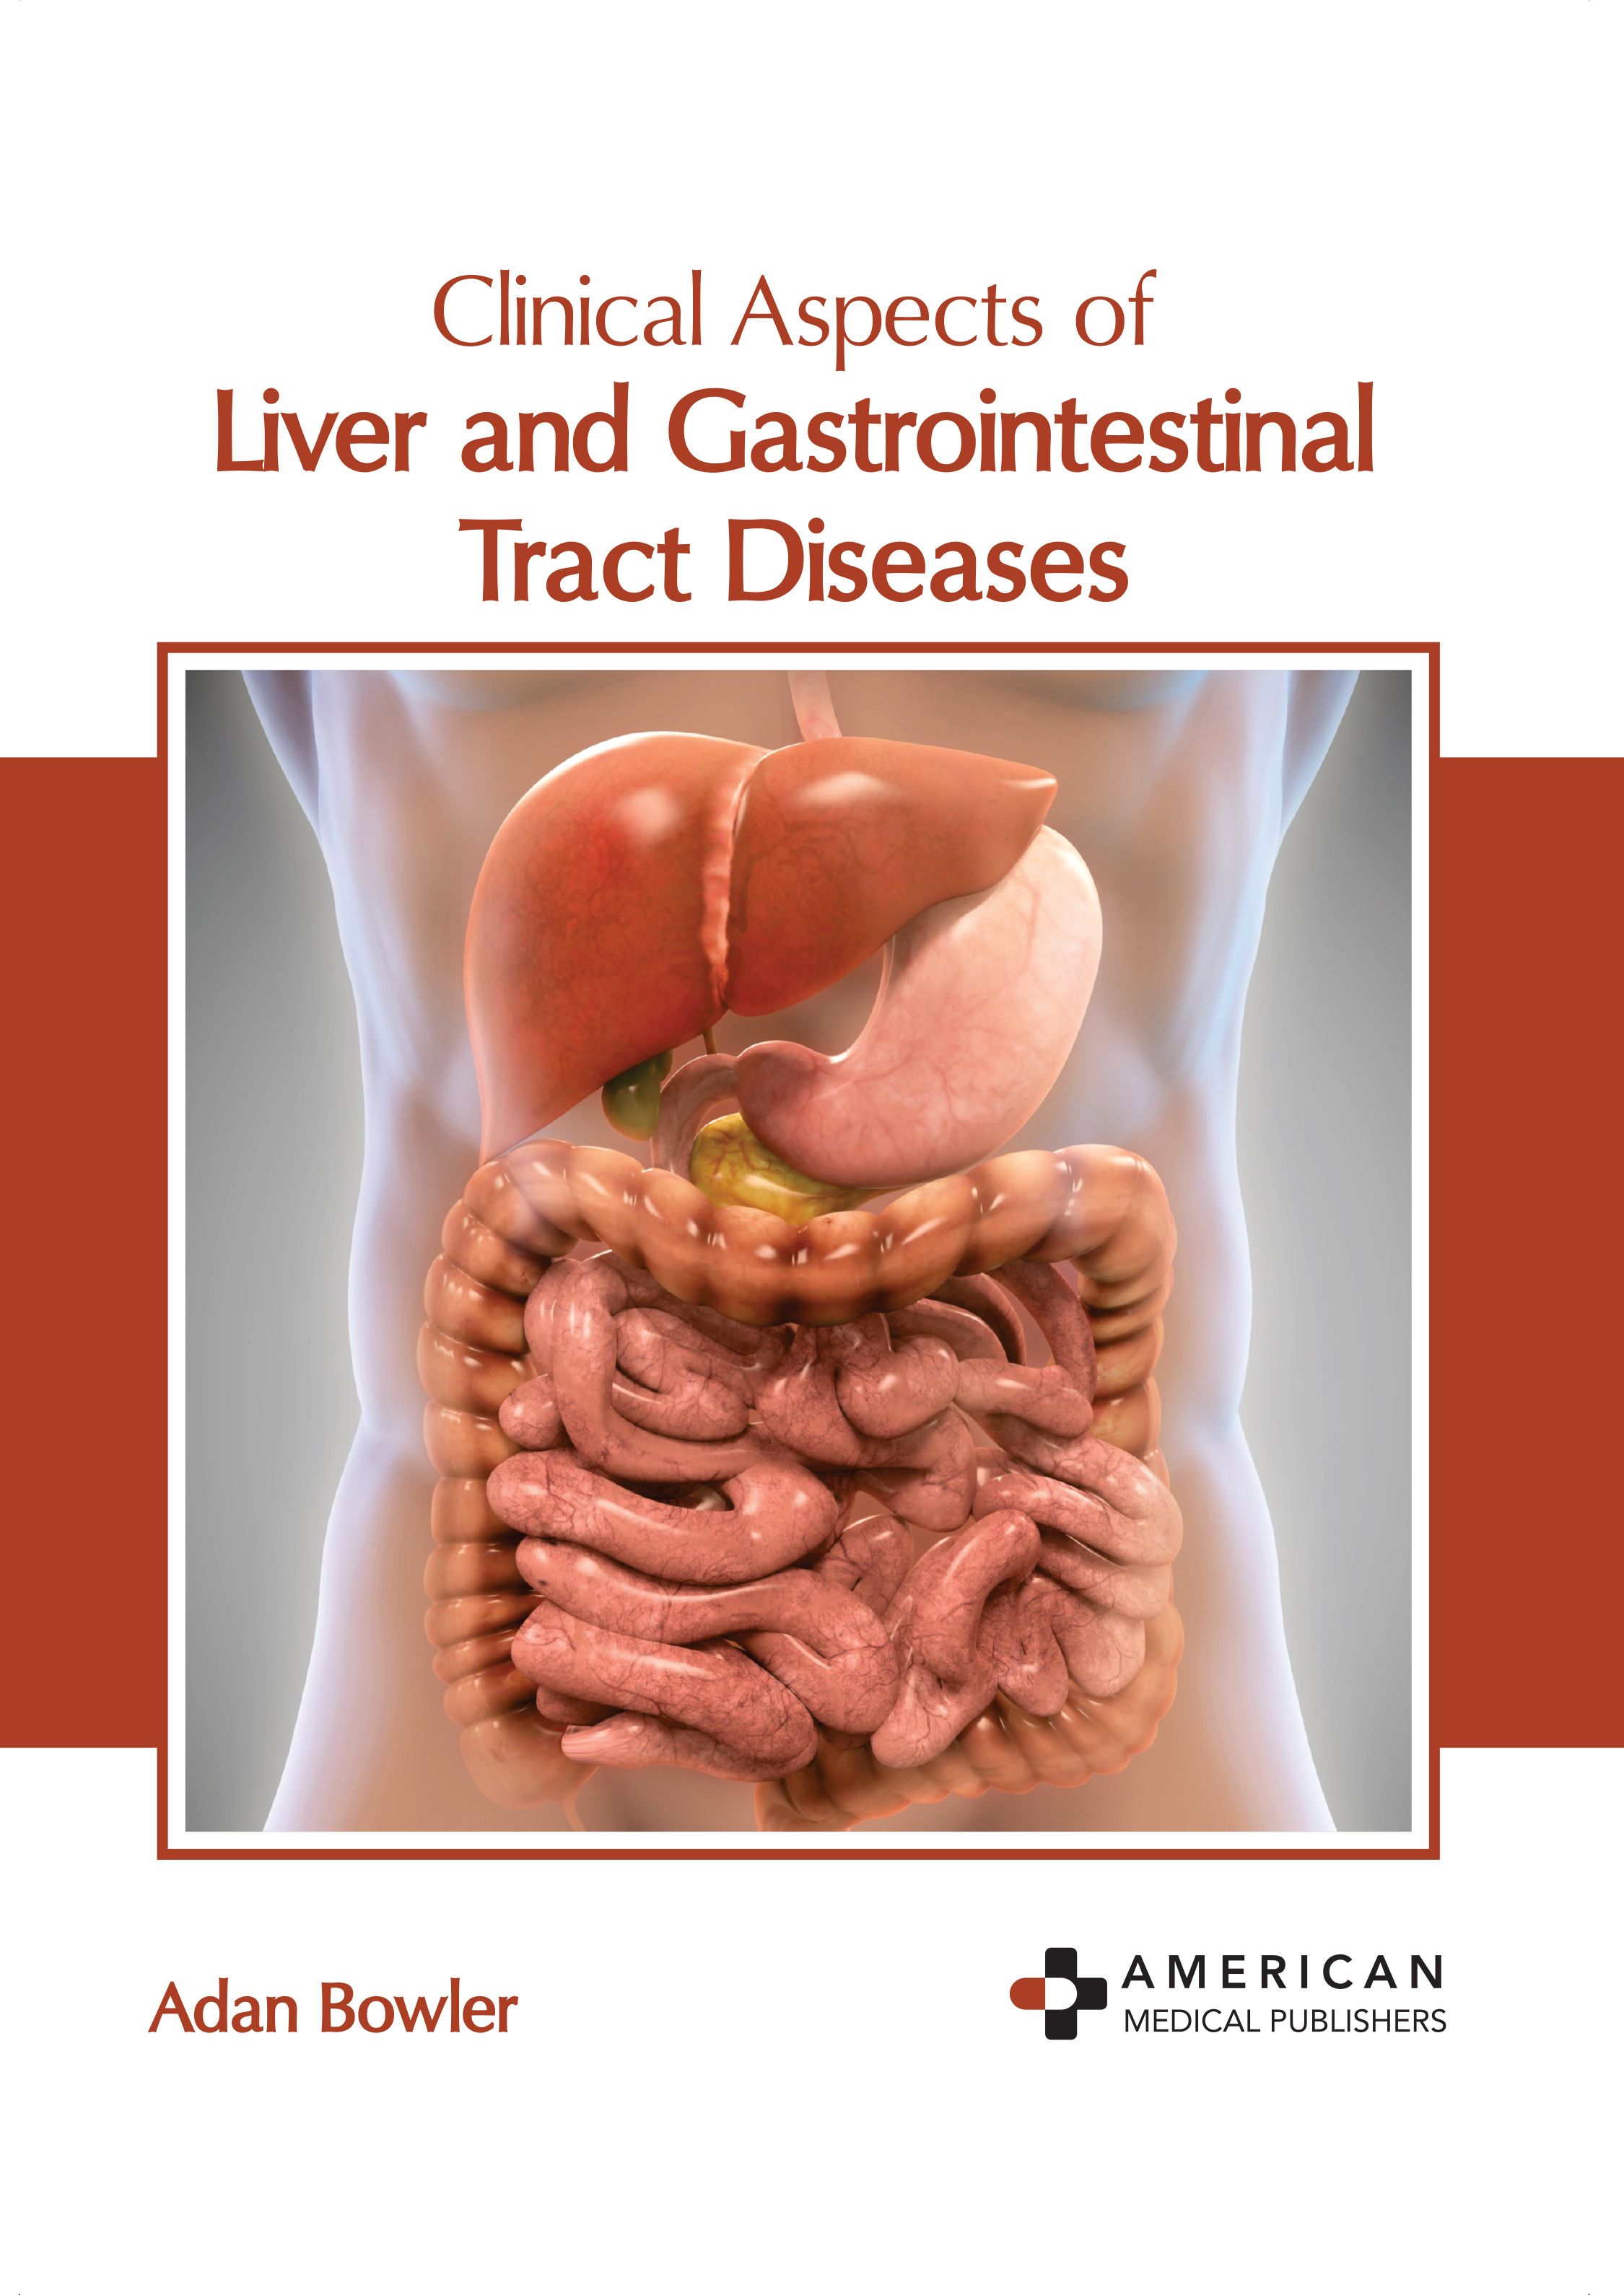 CLINICAL ASPECTS OF LIVER AND GASTROINTESTINAL TRACT DISEASES